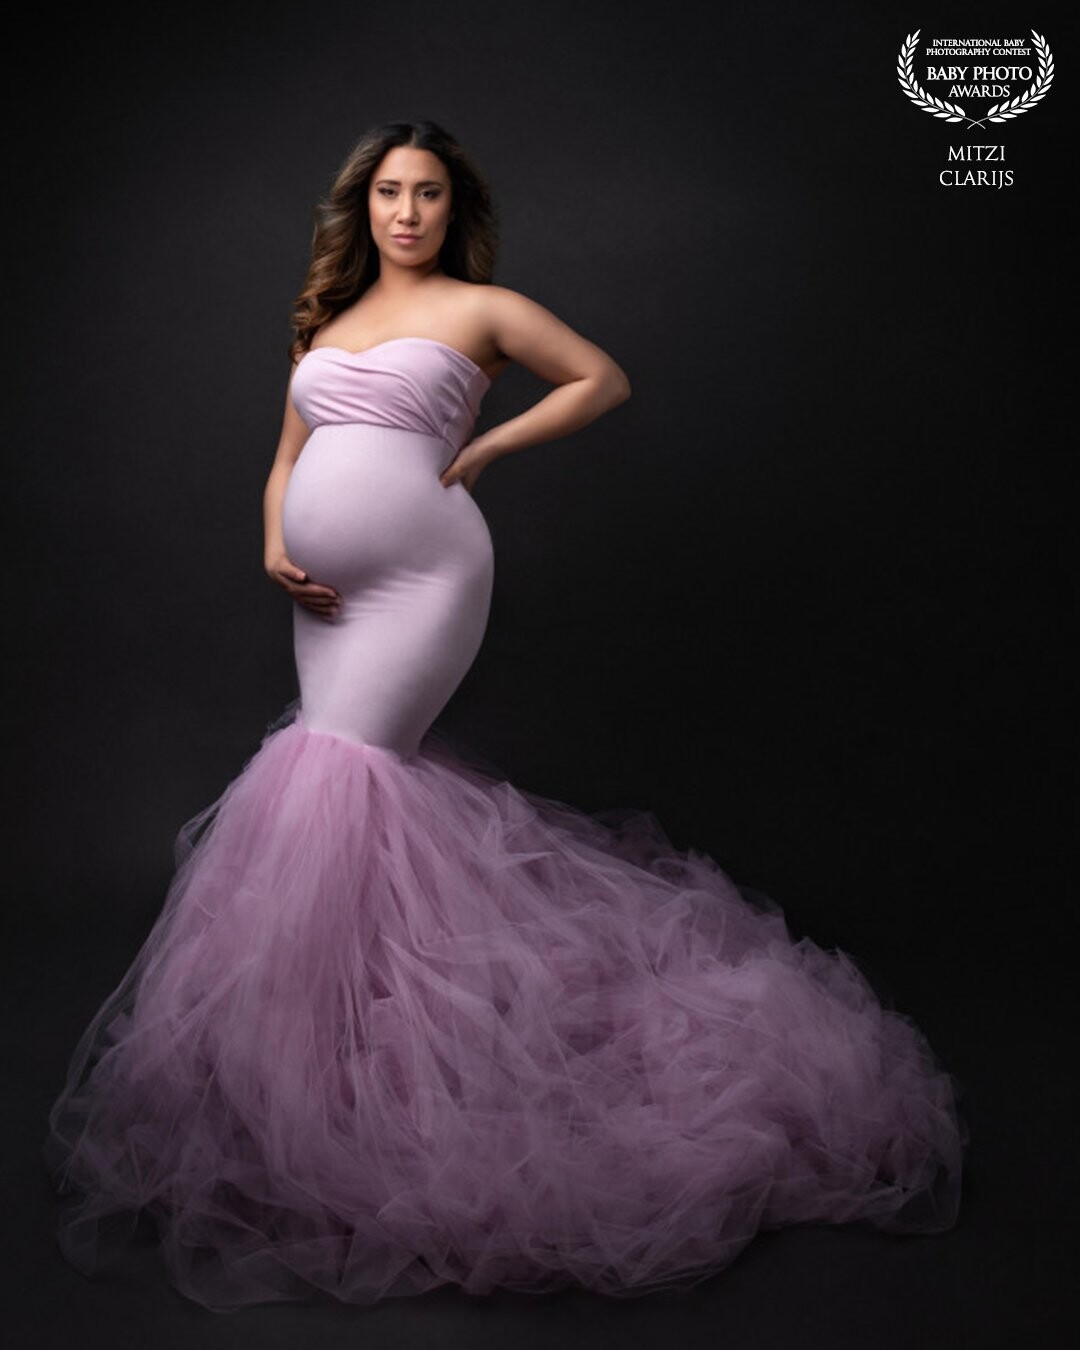 Hello, gorgeous! <br />
This mom really shows that women are beautiful, powerful and sexy, even (or should I say especially!) when your body is changing during a pregnancy.